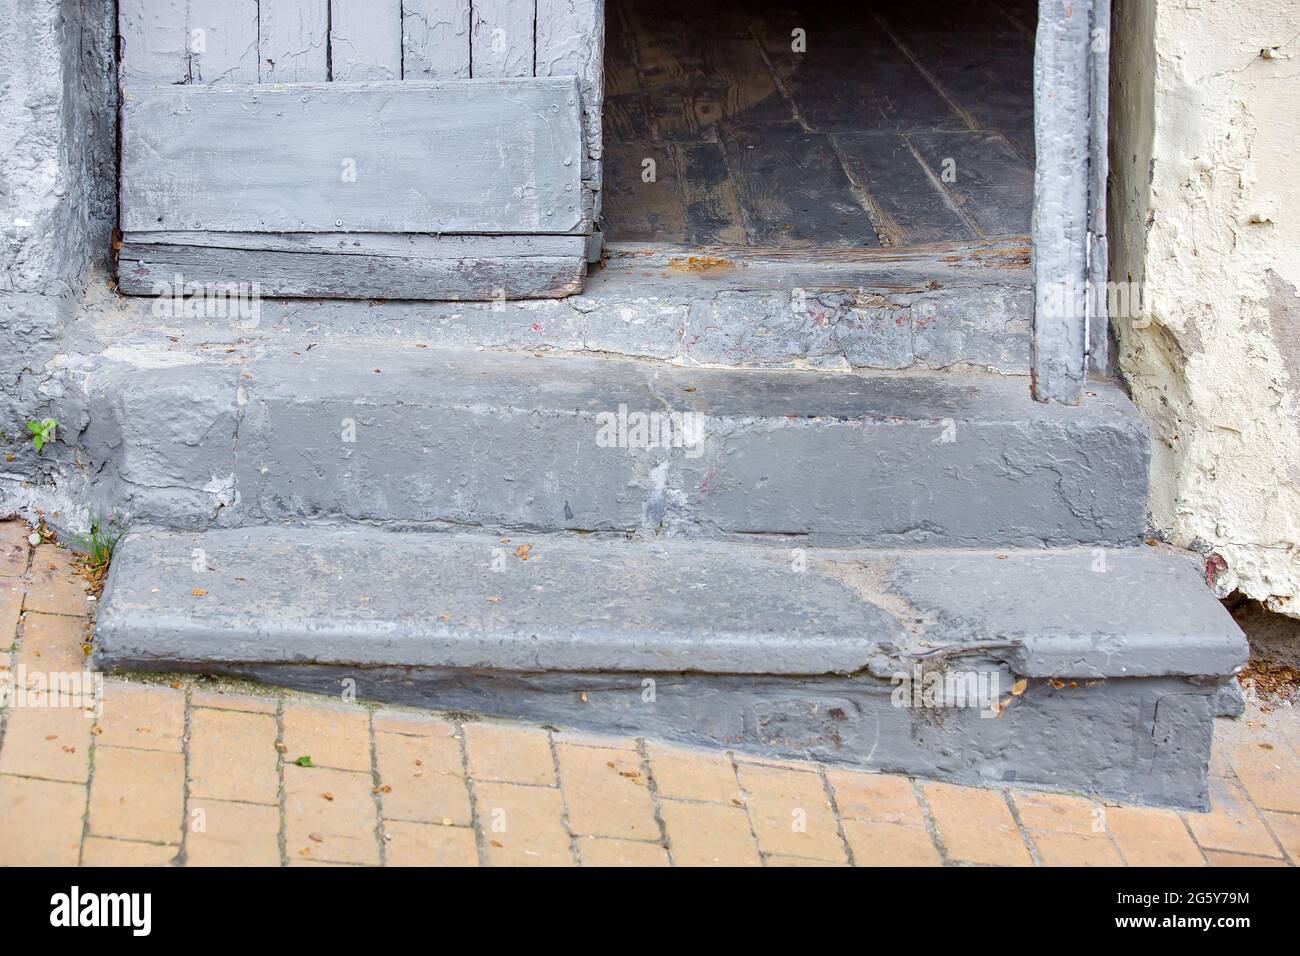 concrete steps entrance to the old house with a wooden door threshold of the building on the descent of the pedestrian sidewalk from stone tiles close Stock Photo